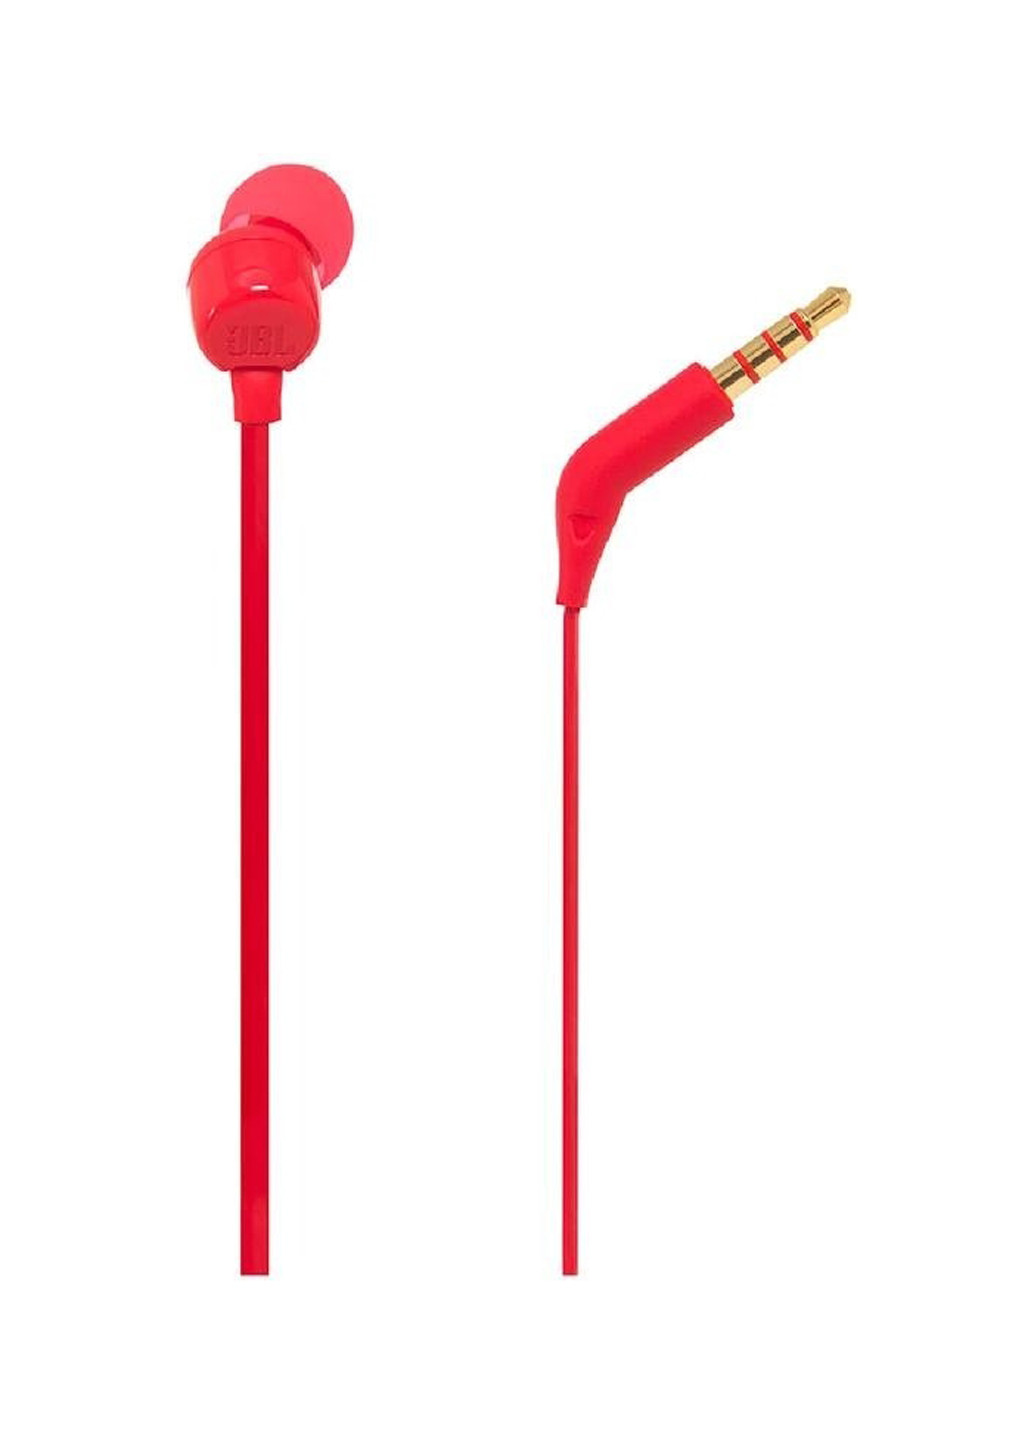 Наушники T110 Red (T110RED) JBL t110 red (jblt110red) (135029130)